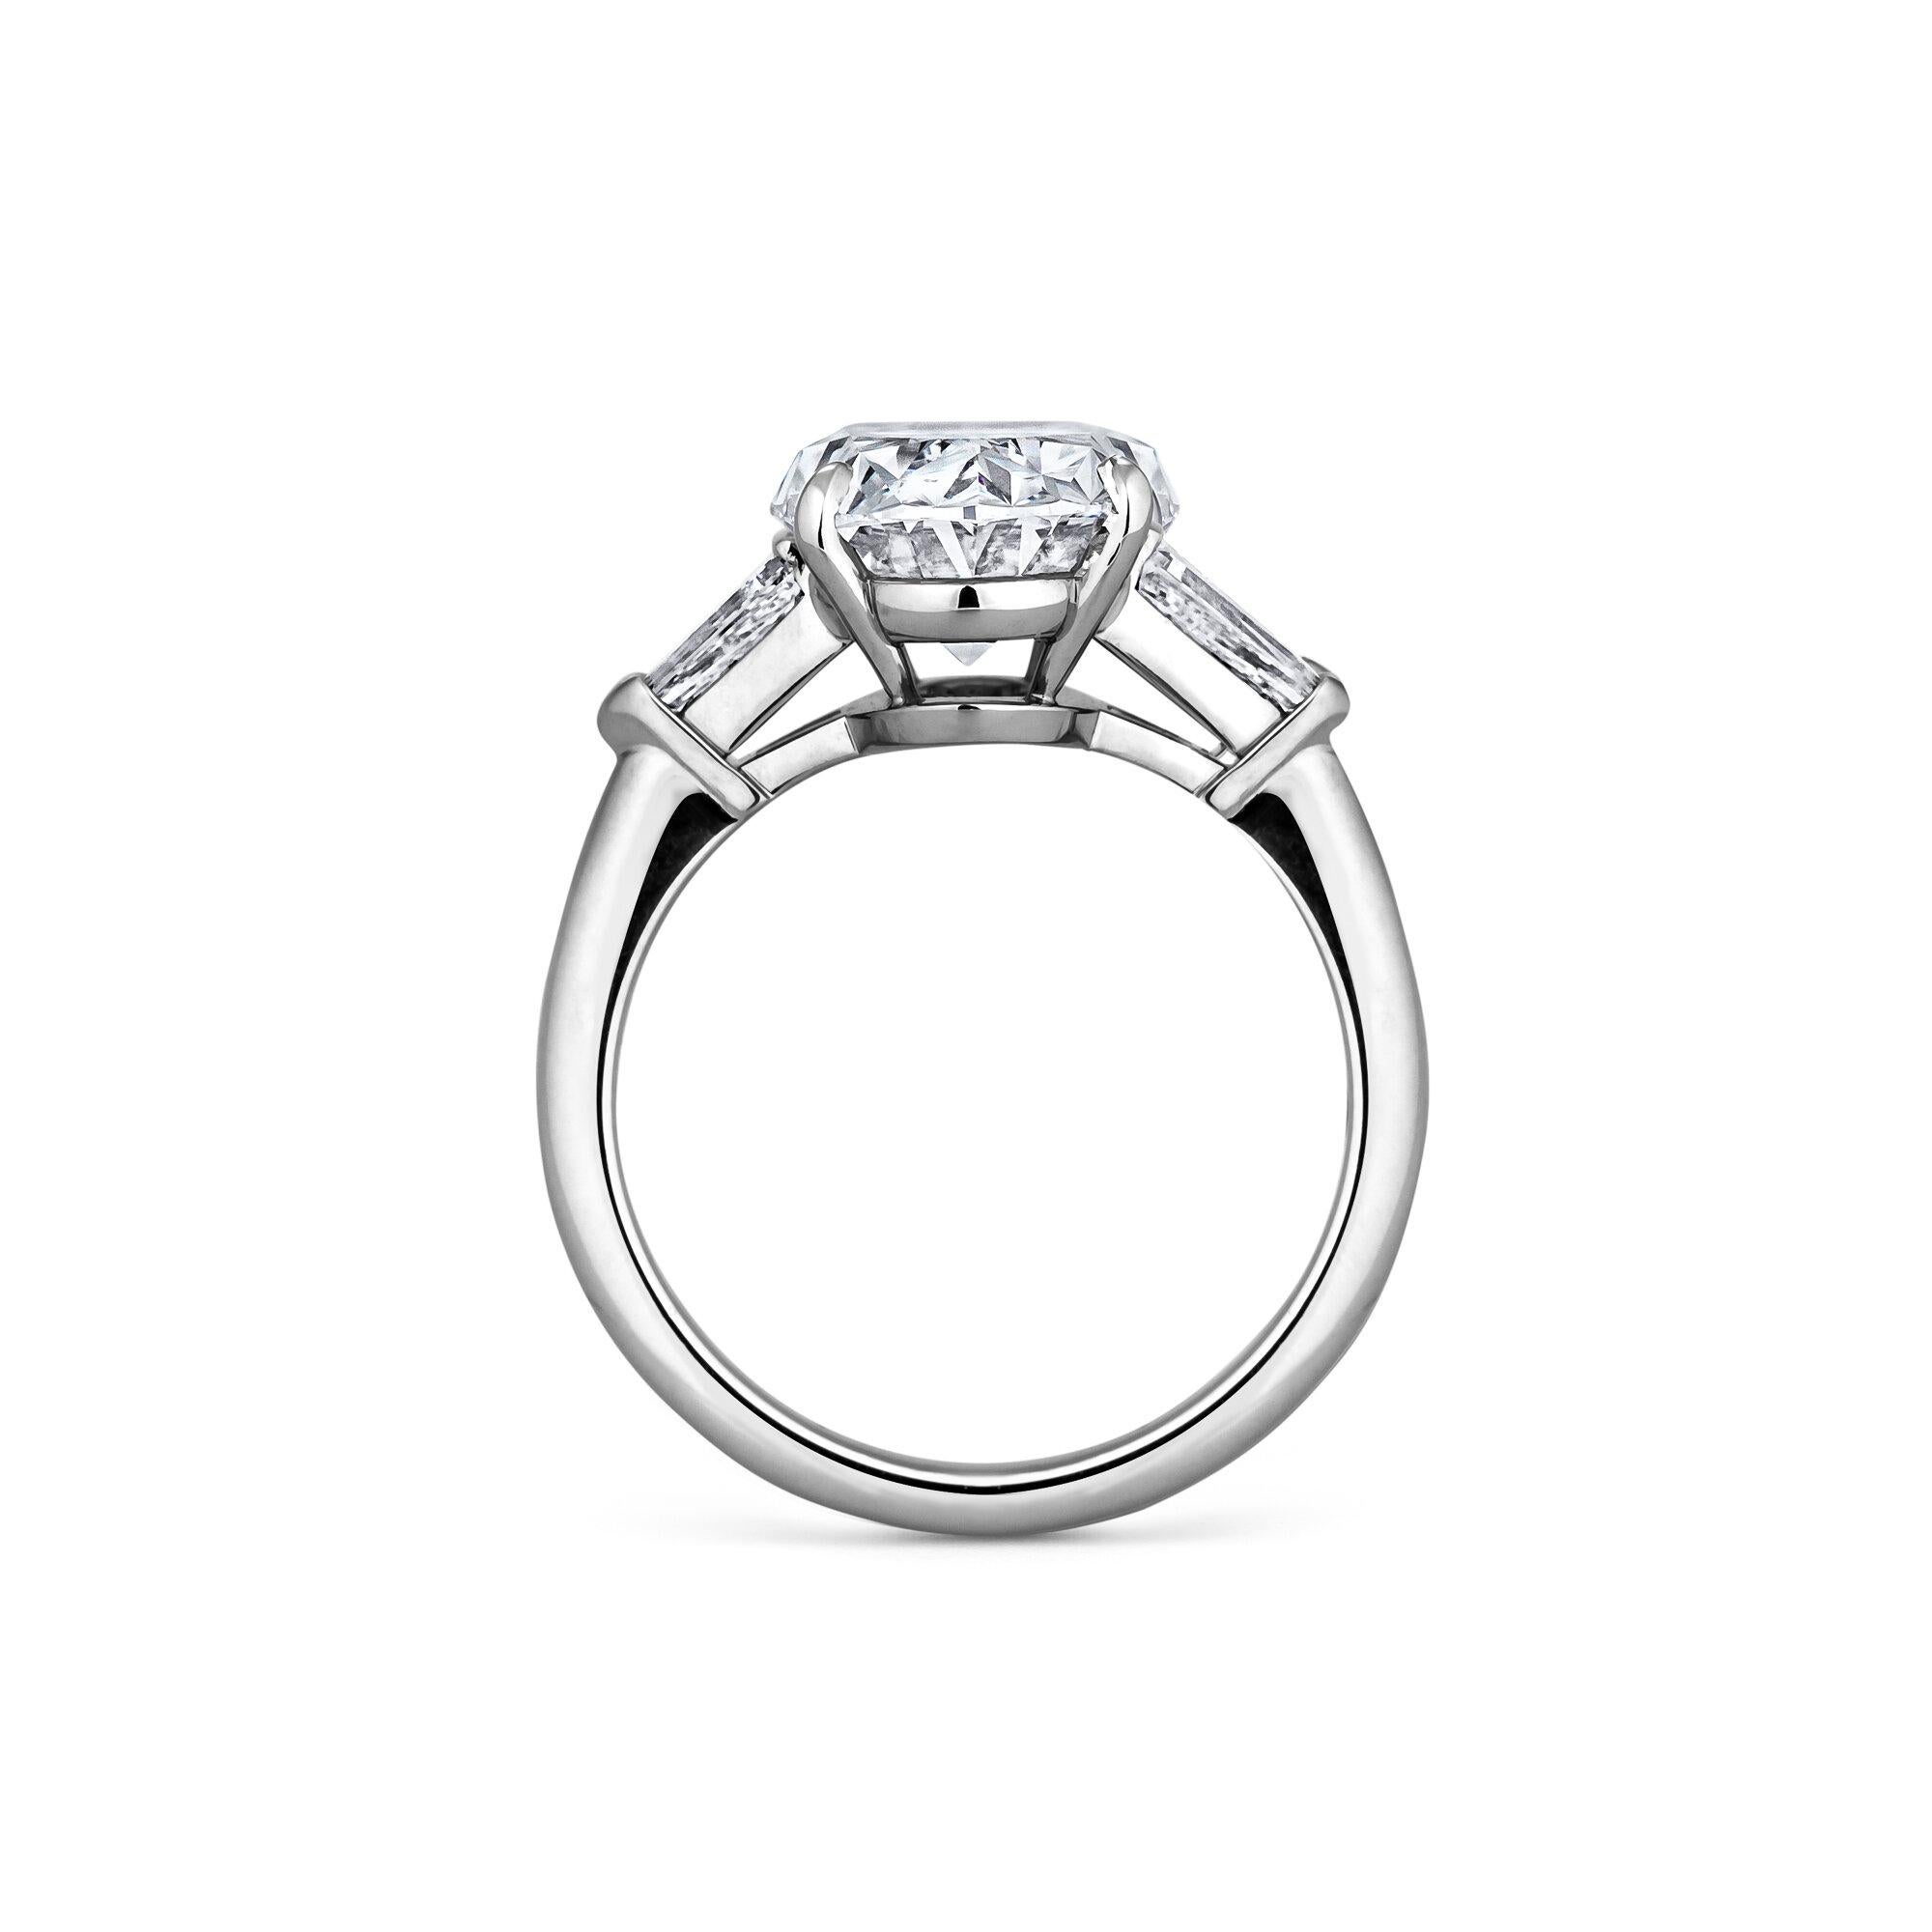 This sumptuous 5.47 cushion brilliant cut diamond engagement ring is as full and fiery as a gemstone can get.  Mounted in a handmade platinum setting with two diamond side bullets, this ring is simply extraordinary.  Center stone F color.  VS1